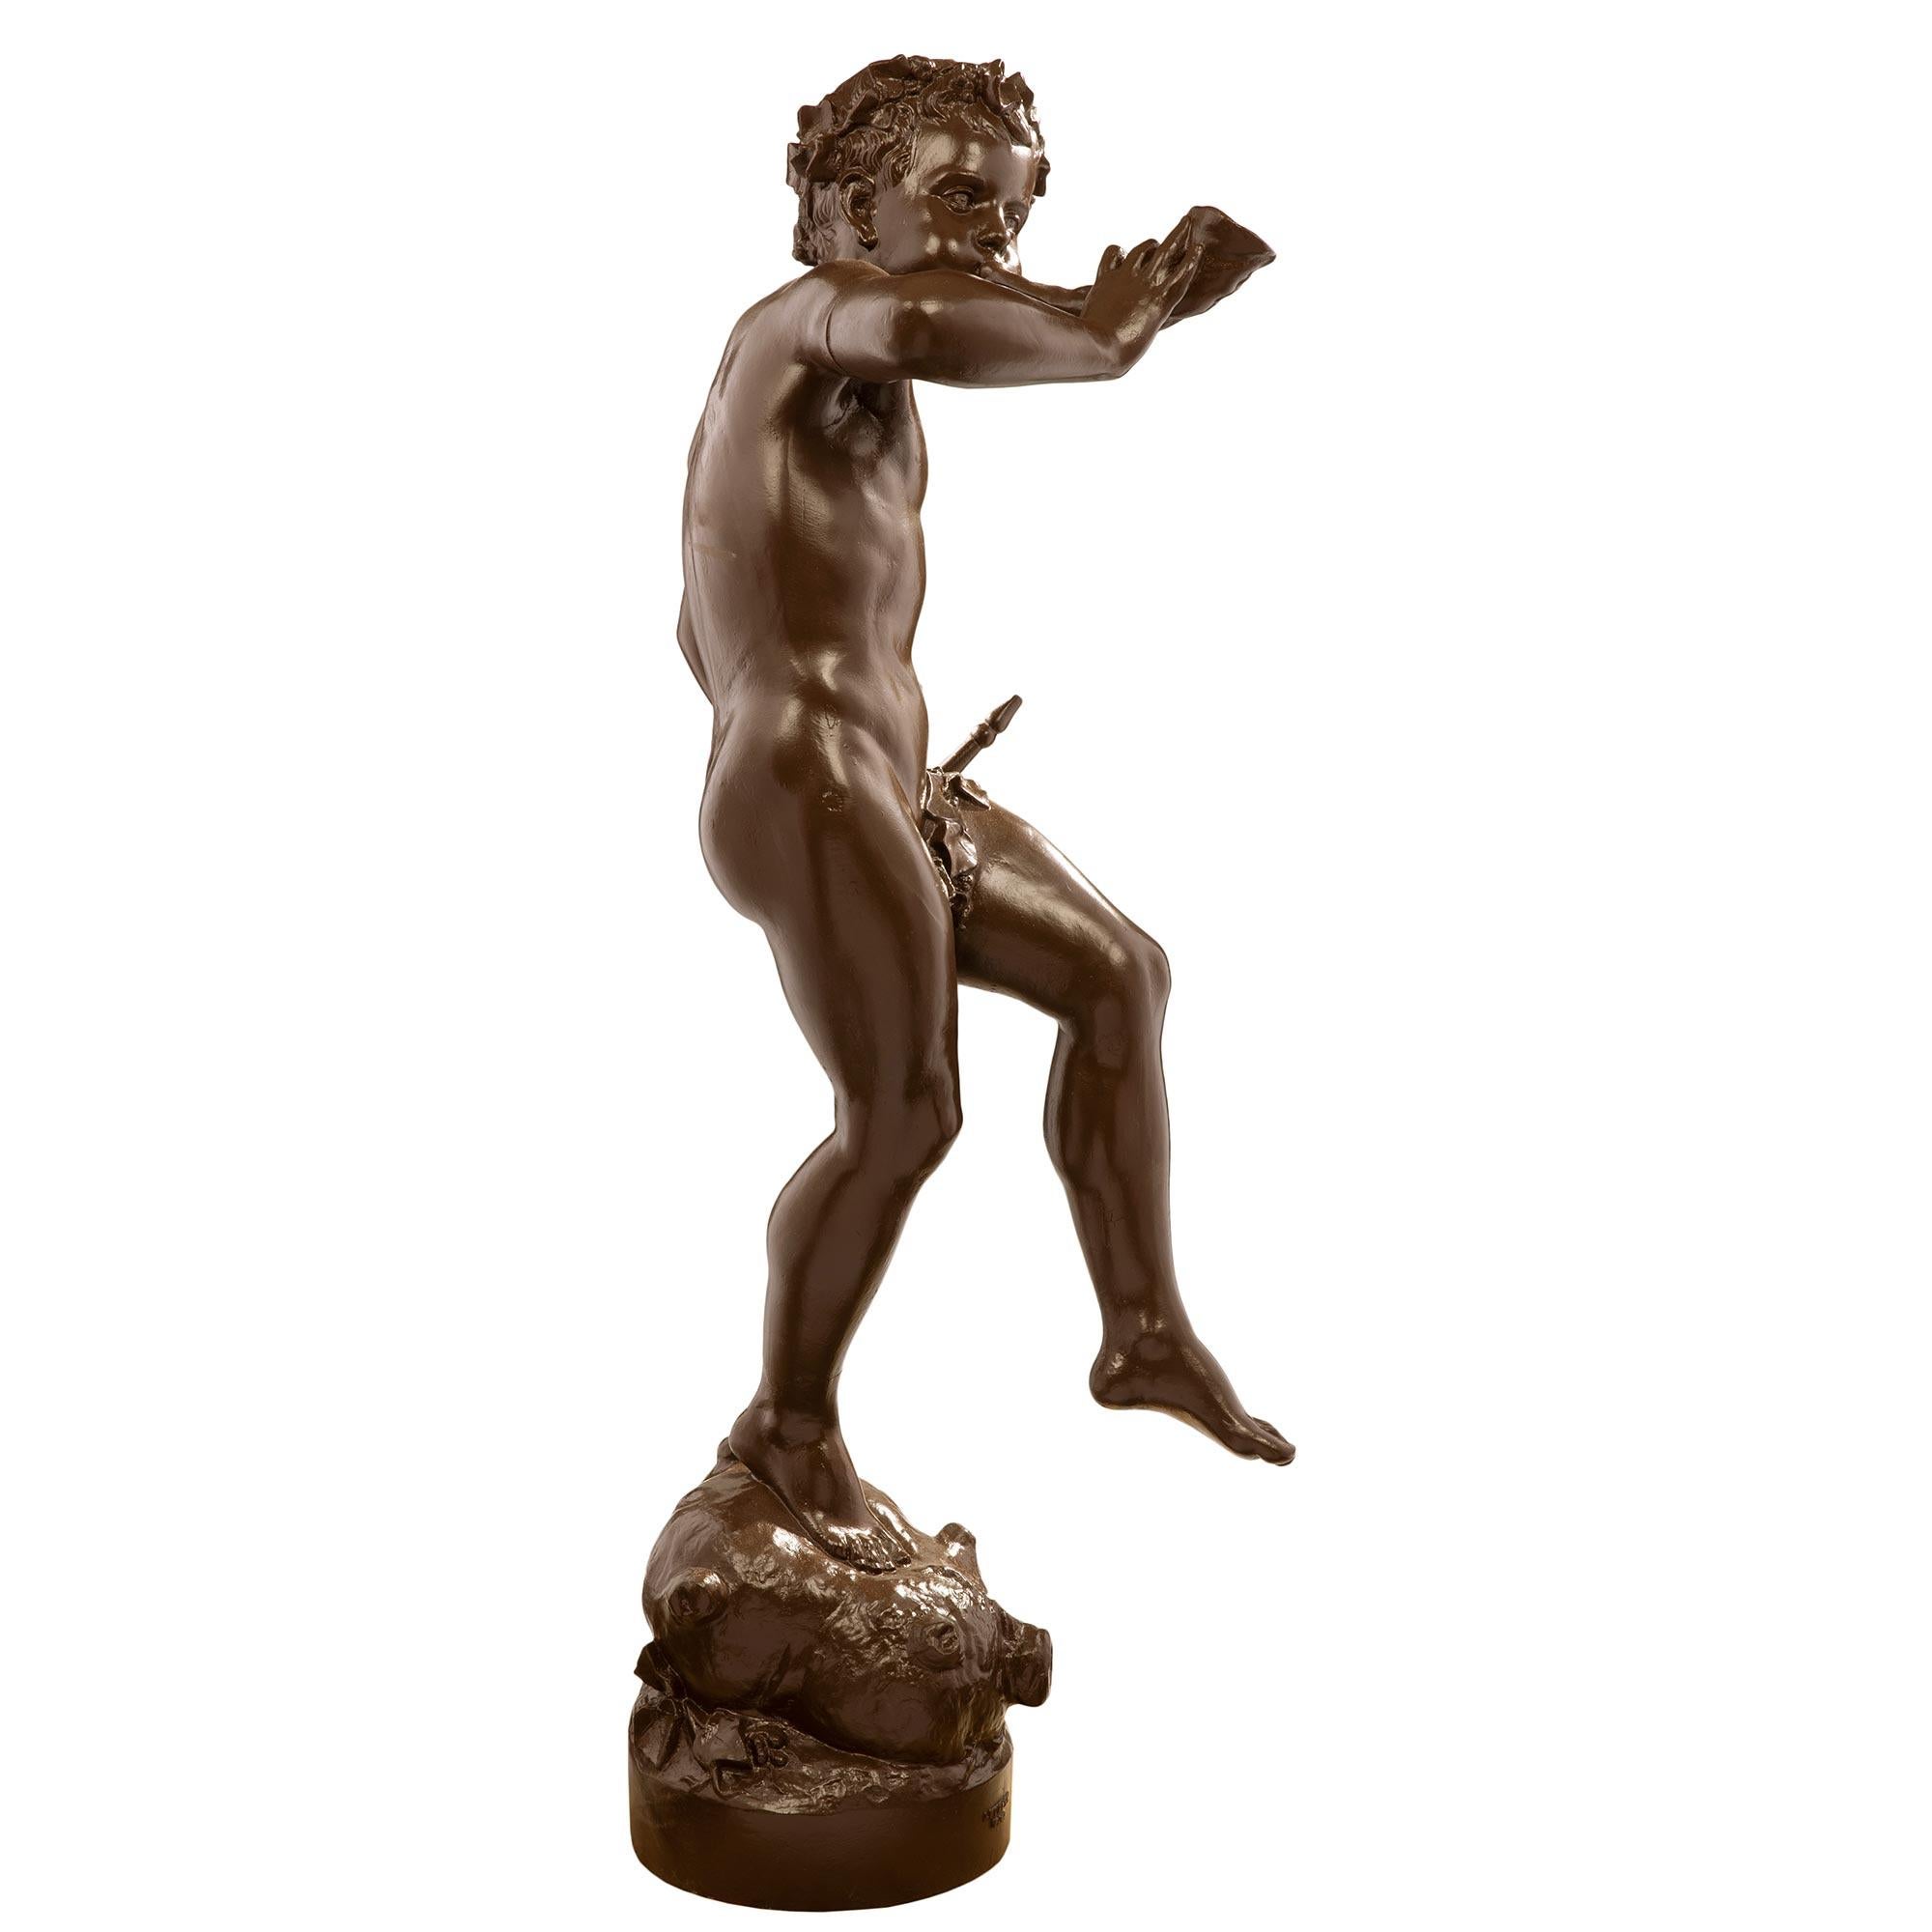 French 19th Century Cast Iron Statue of a Young Boy, Signed ‘A. DURENNE, Paris’ In Good Condition For Sale In West Palm Beach, FL